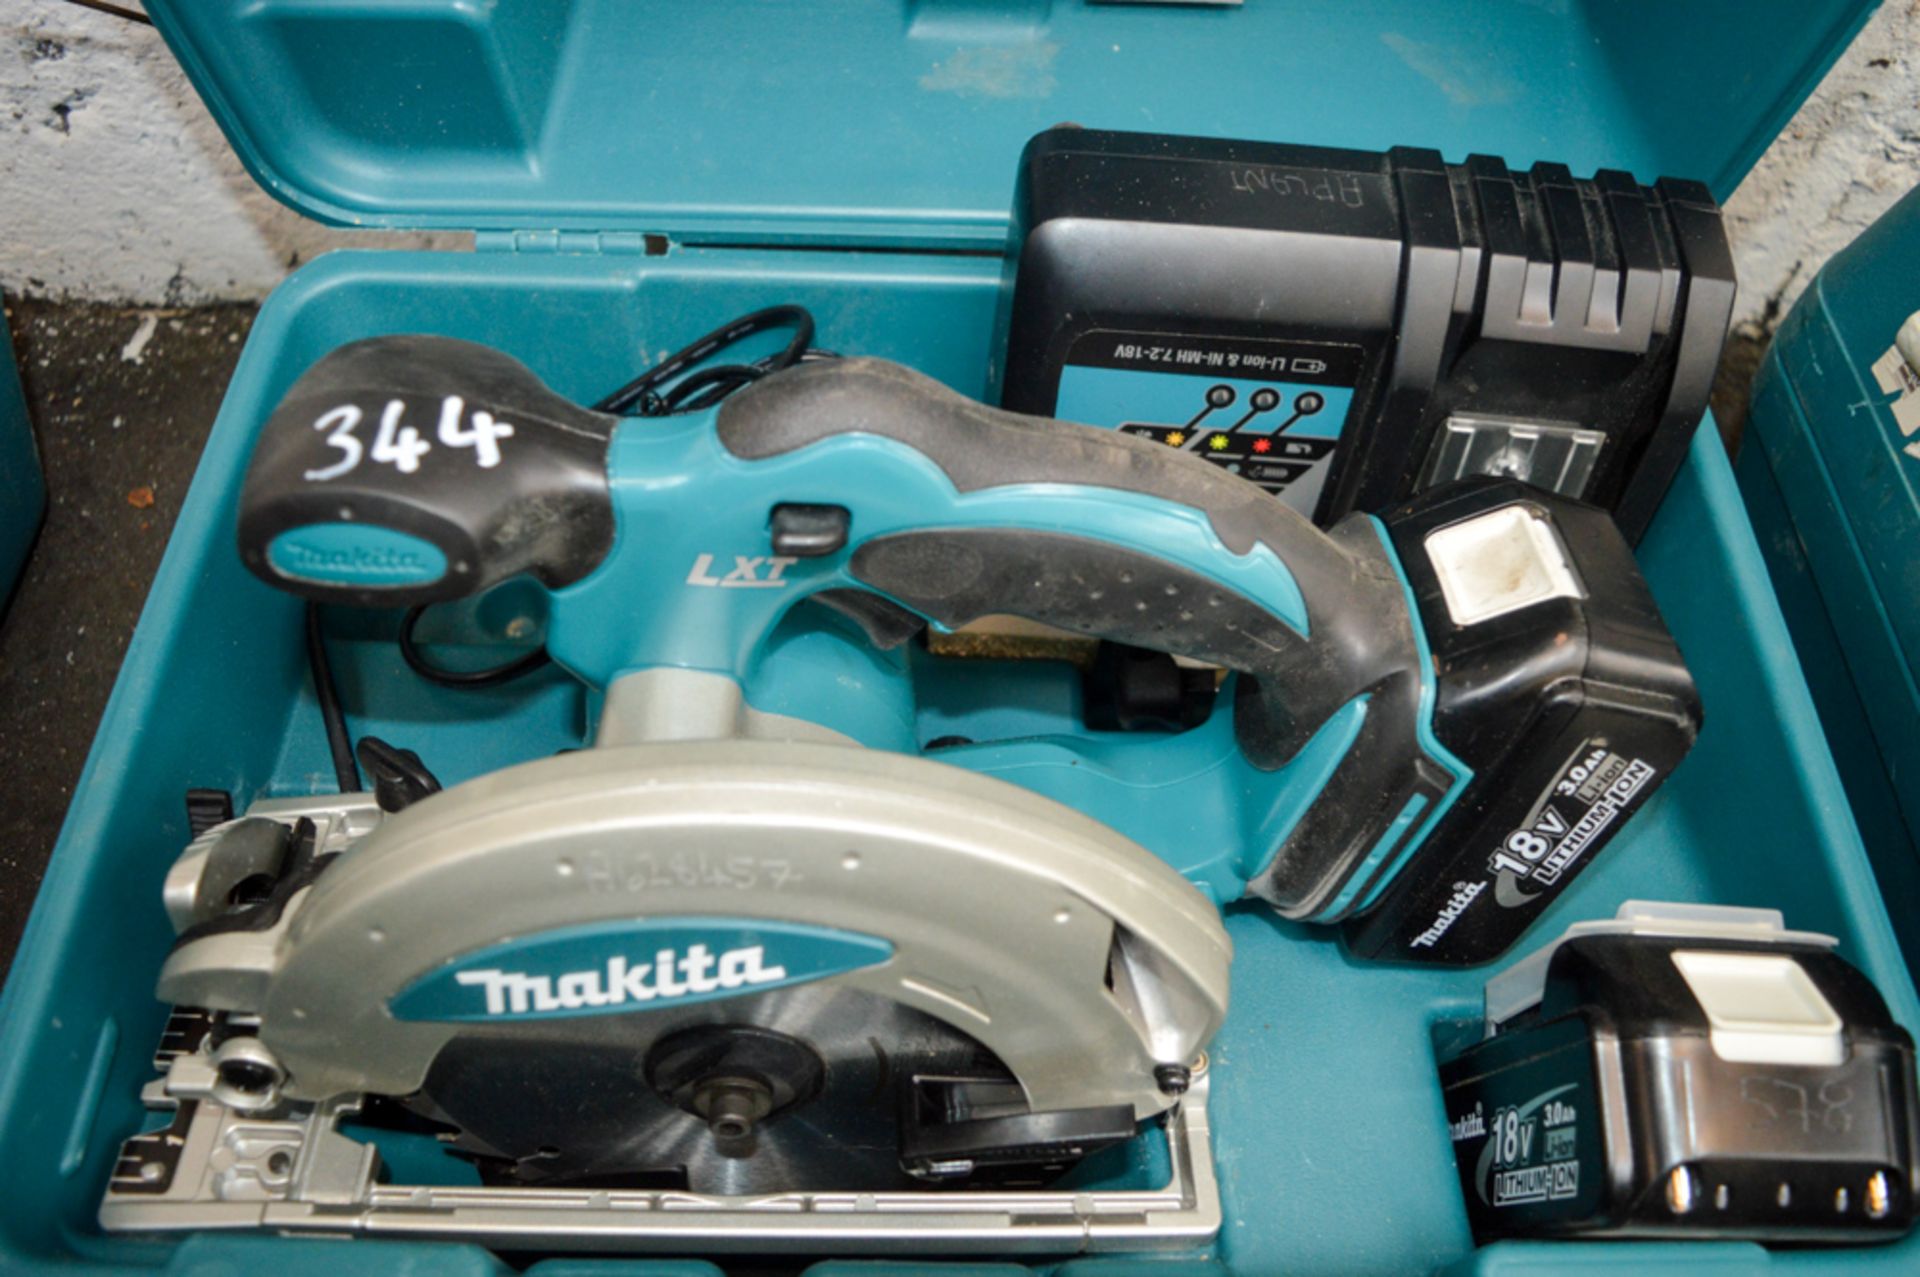 Makita 18v cordless circular saw c/w 2 batteries, charger & carry case A628457